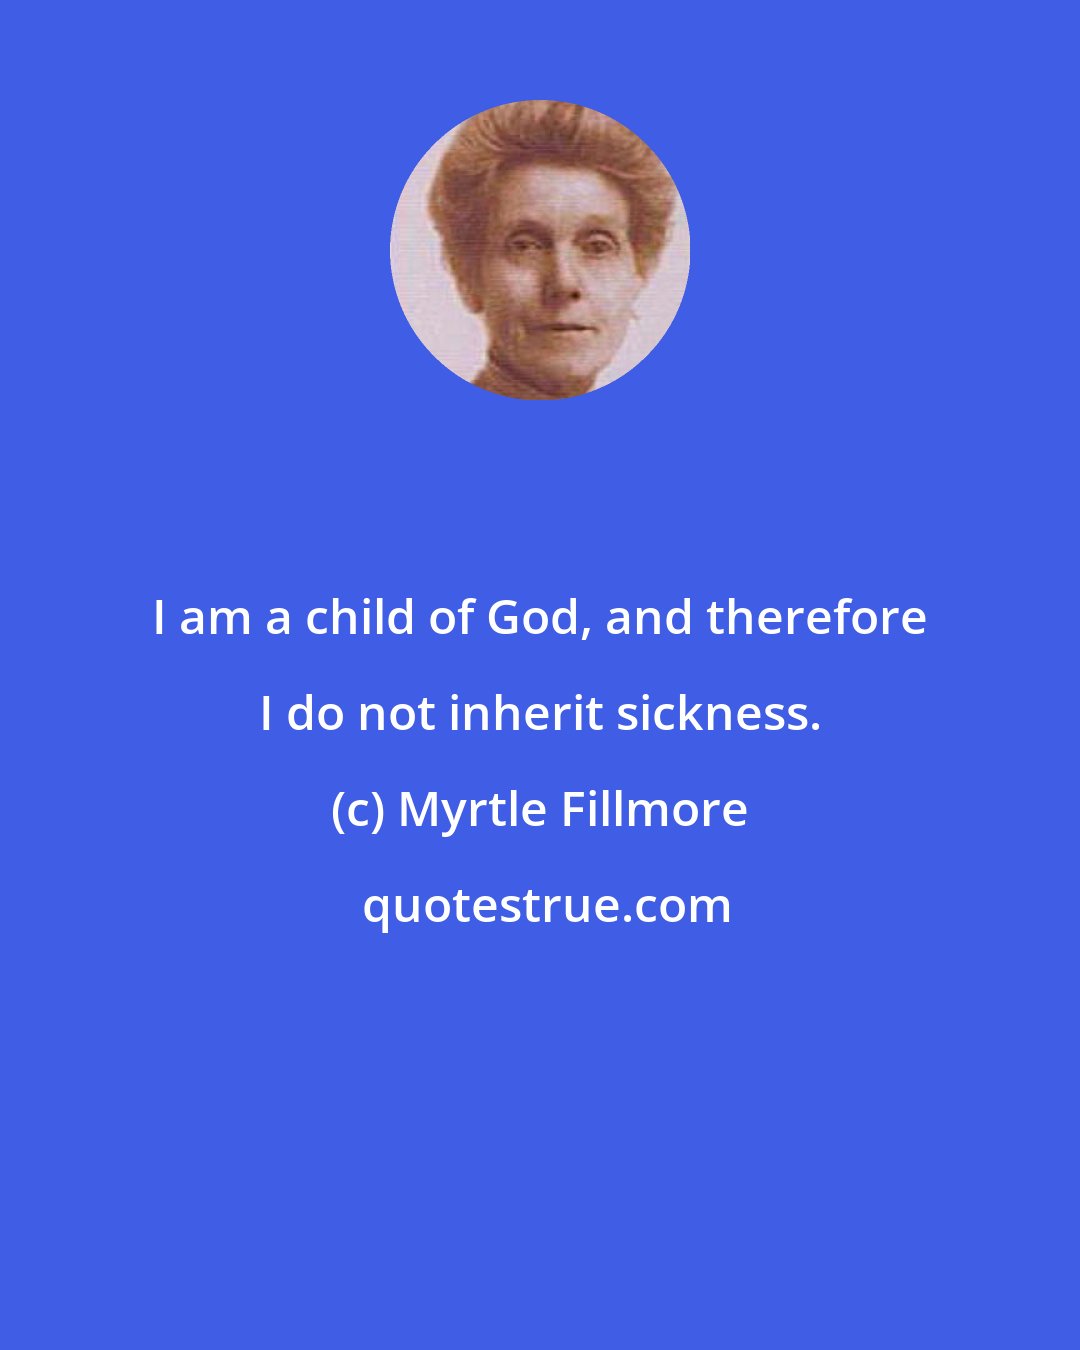 Myrtle Fillmore: I am a child of God, and therefore I do not inherit sickness.